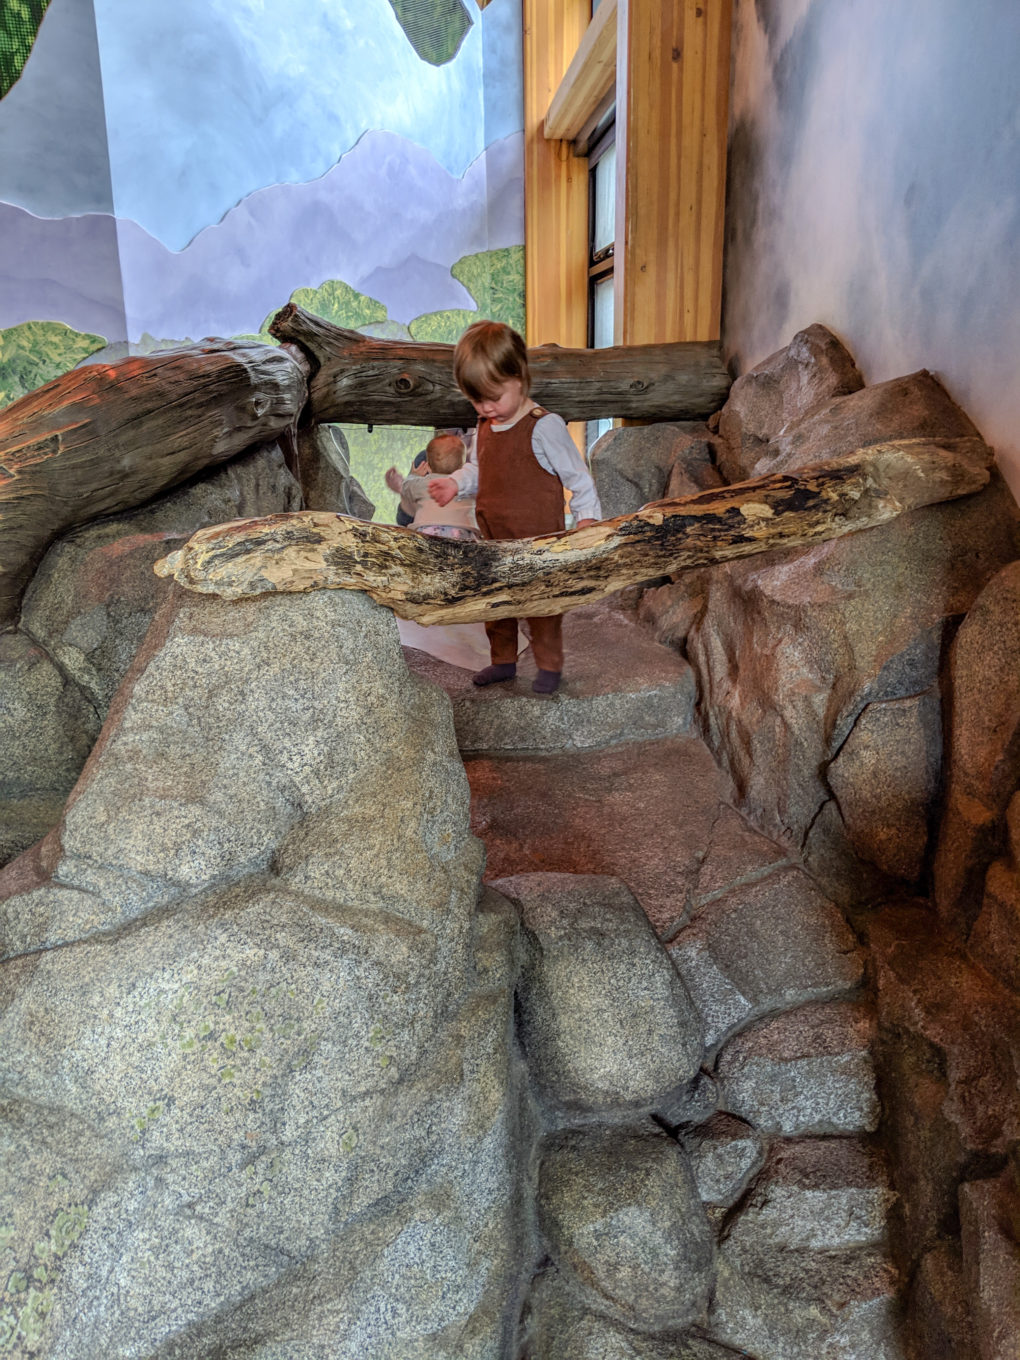 Woodland Park Zoo - How to visit Seattle with kids on a 3 day trip. Fun activities to do and where to eat.